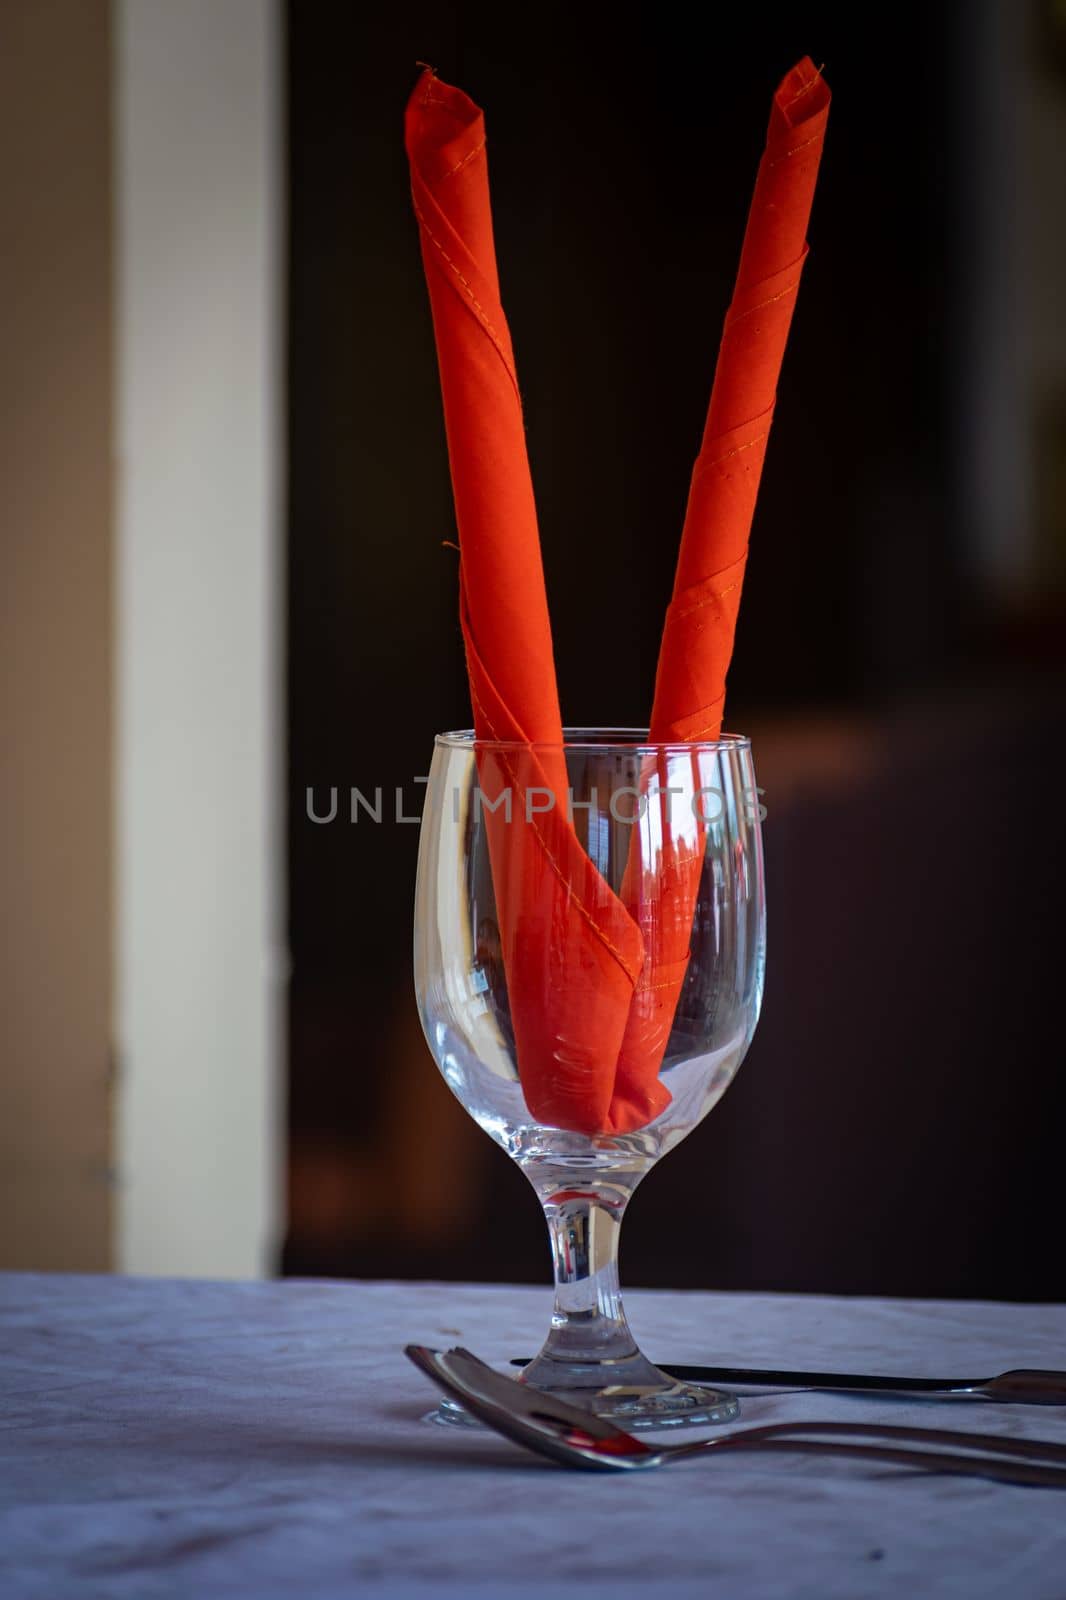 Unique Water Glass on the table at a restaurant, Restaurant drink water glass with red decoration, selective focus, blur background